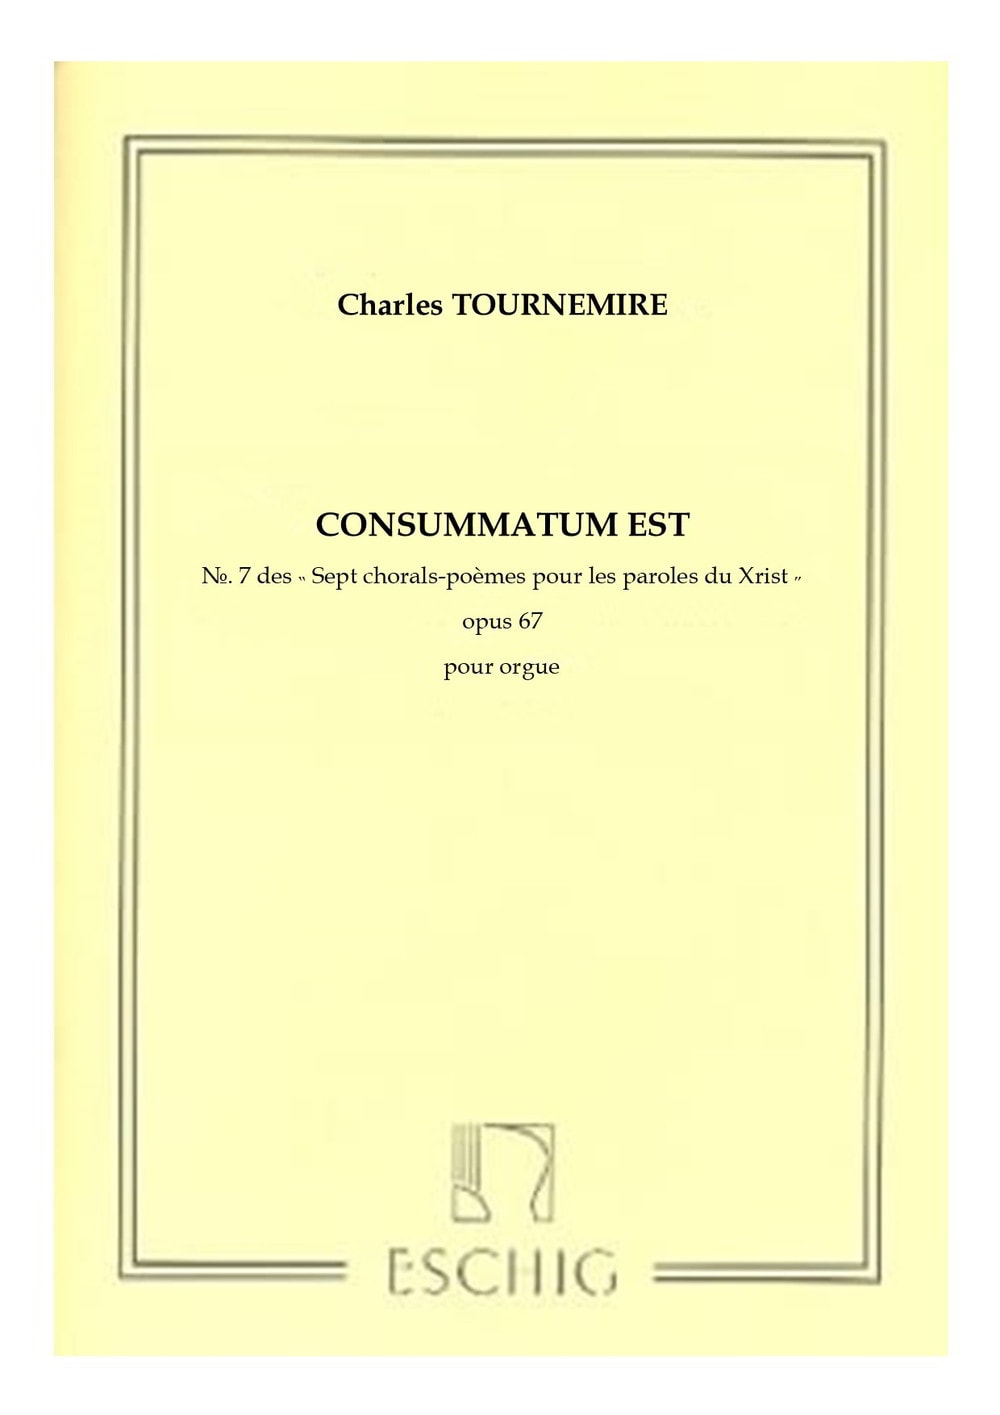 Tournemire: Seven Choral-Poems on the Seven Last Words of Christ Opus 67 No. 7 for Organ published by Max Eschig